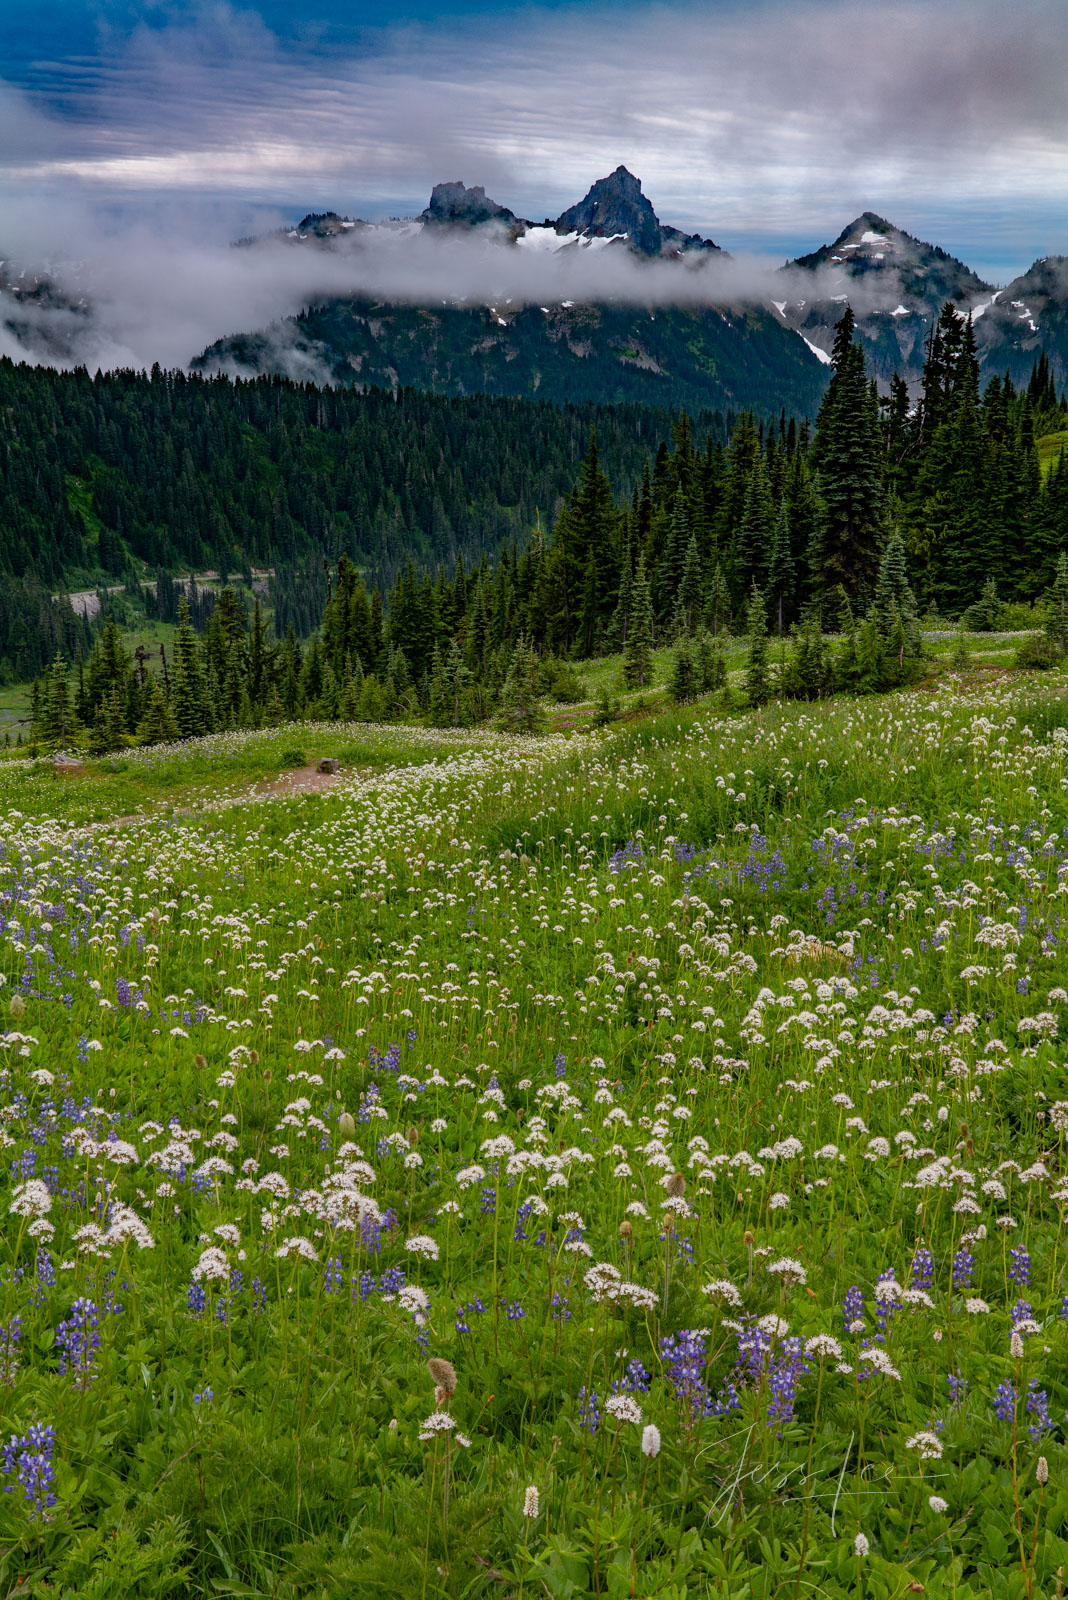 Mount Rainer Photograph Fine Art Print of summer blue color flowers and snow capped mountain photo. vertical print